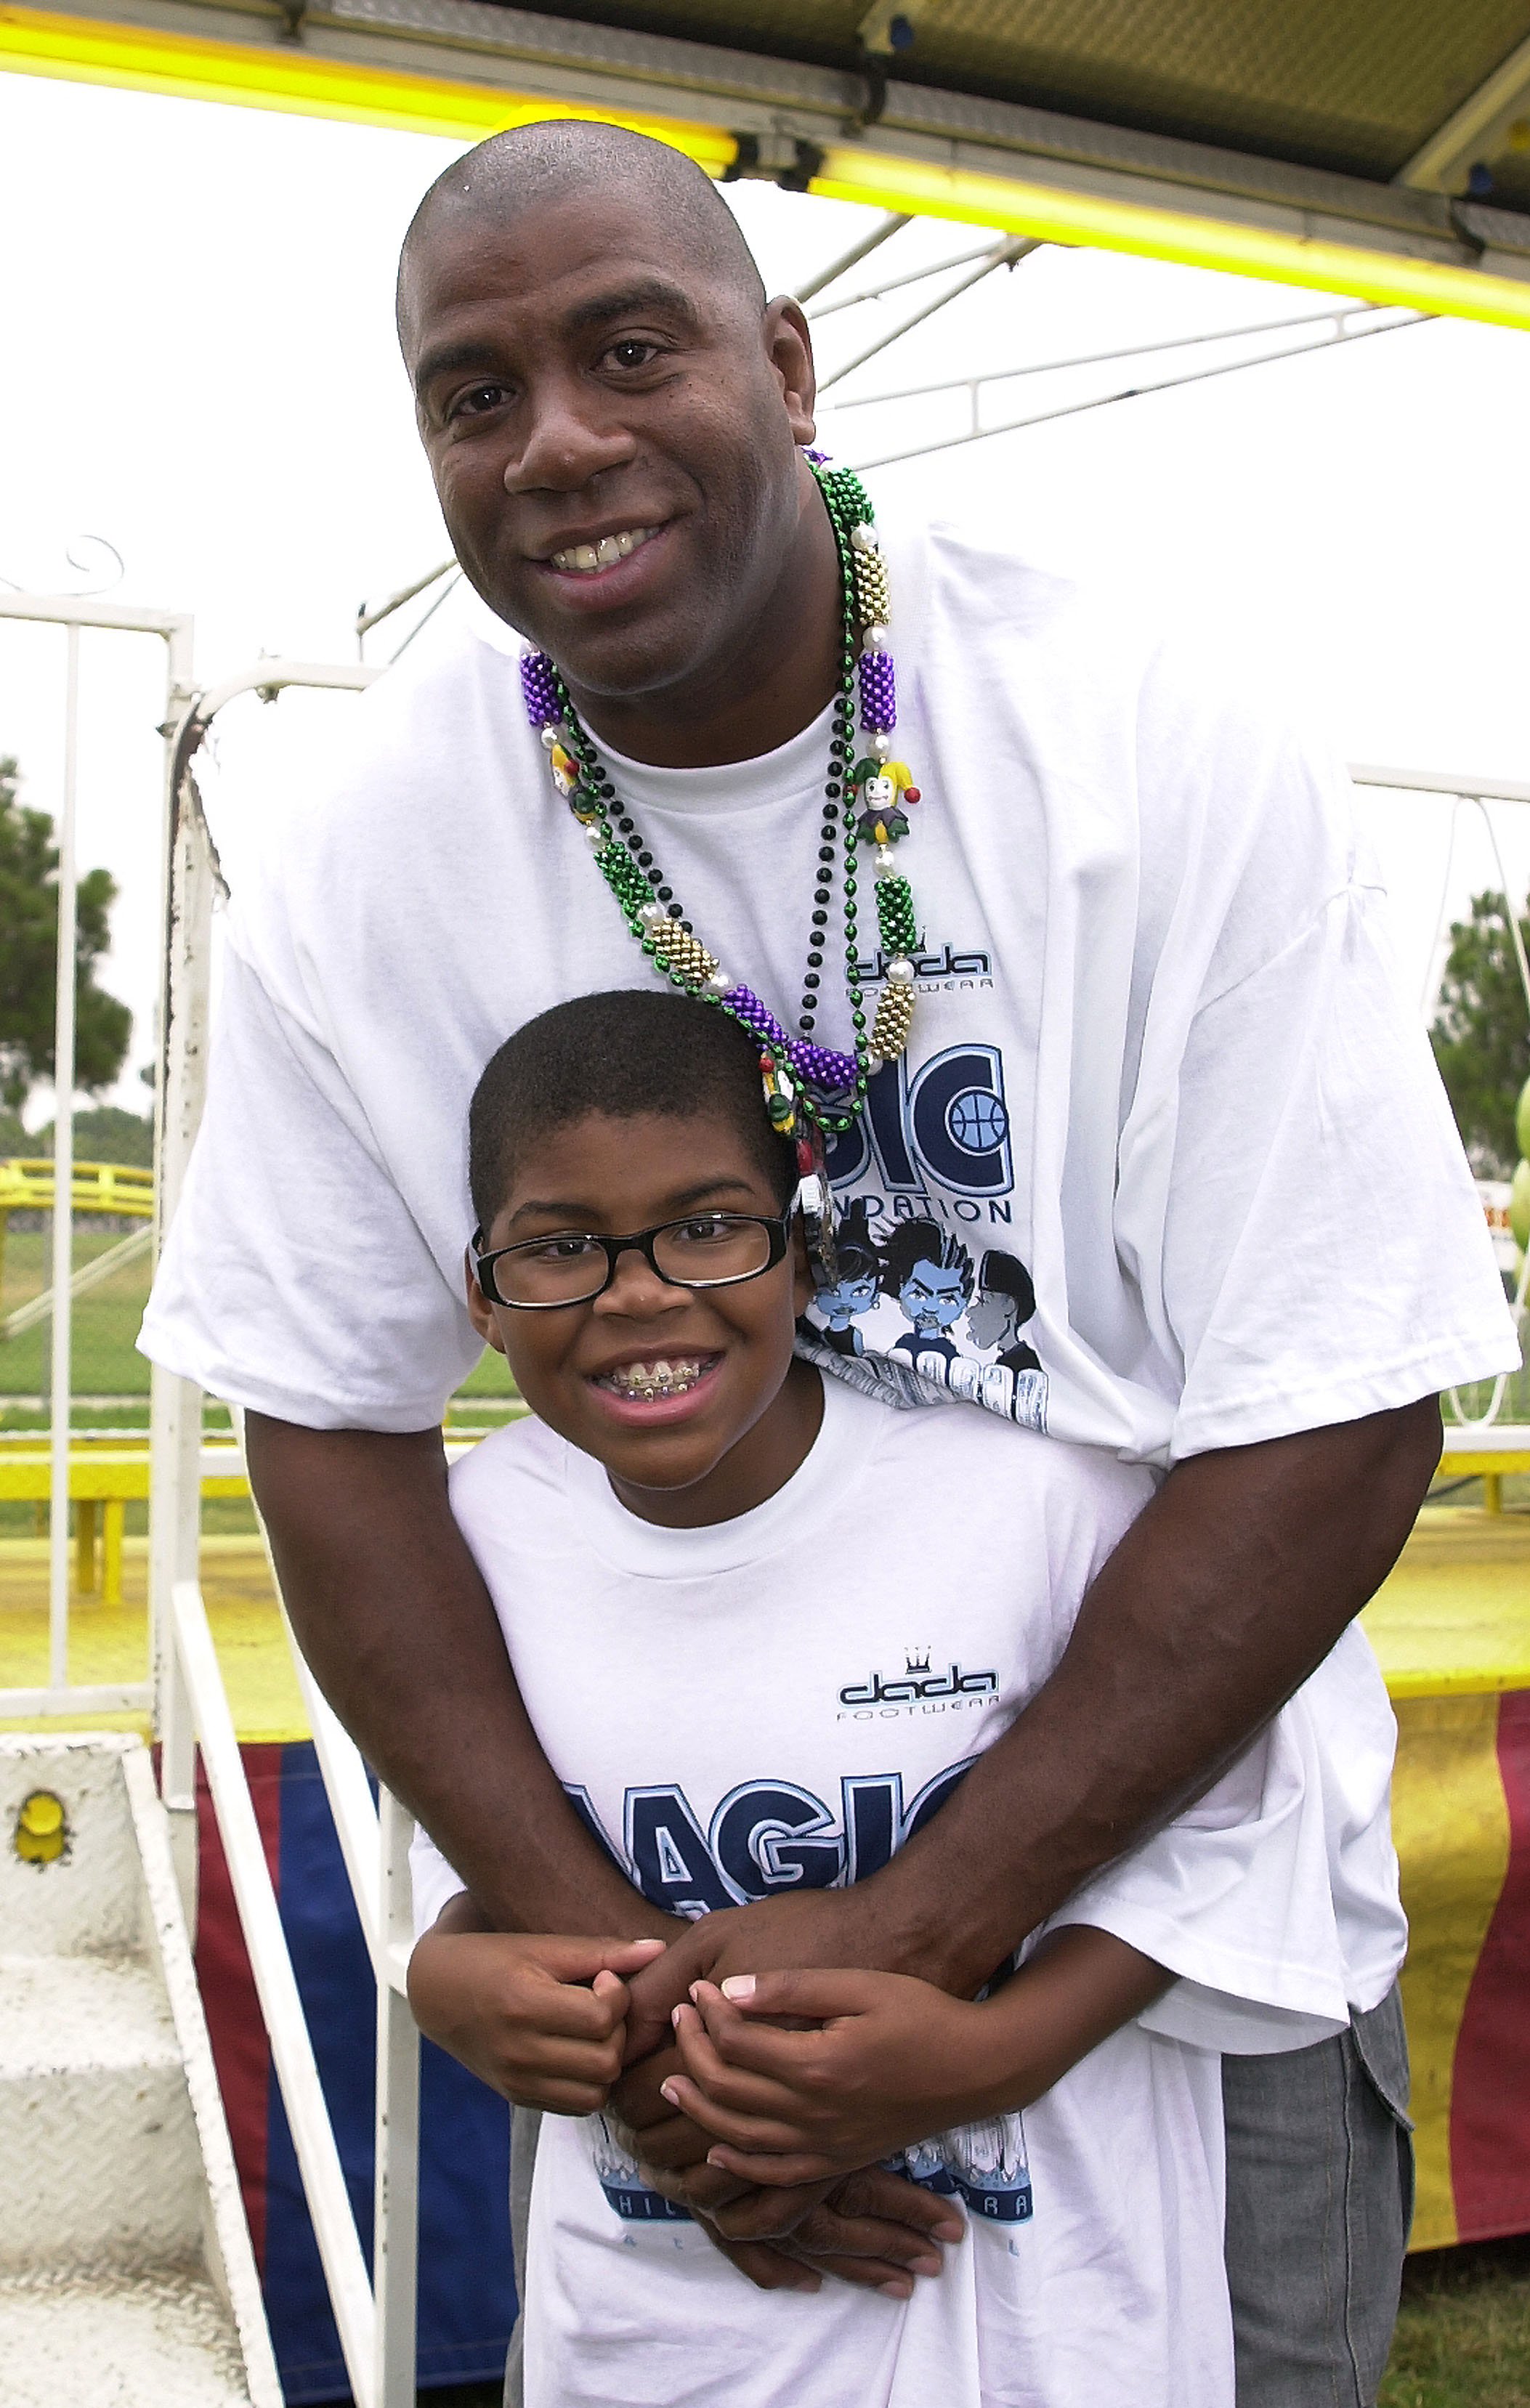 Magic Johnson and his son EJ Johnson during Magic Johnson Foundation's 4th Annual Children's Mardi Gras at Earvin "Magic" Johnson Recreation Center in Los Angeles, California. / Source: Getty Images